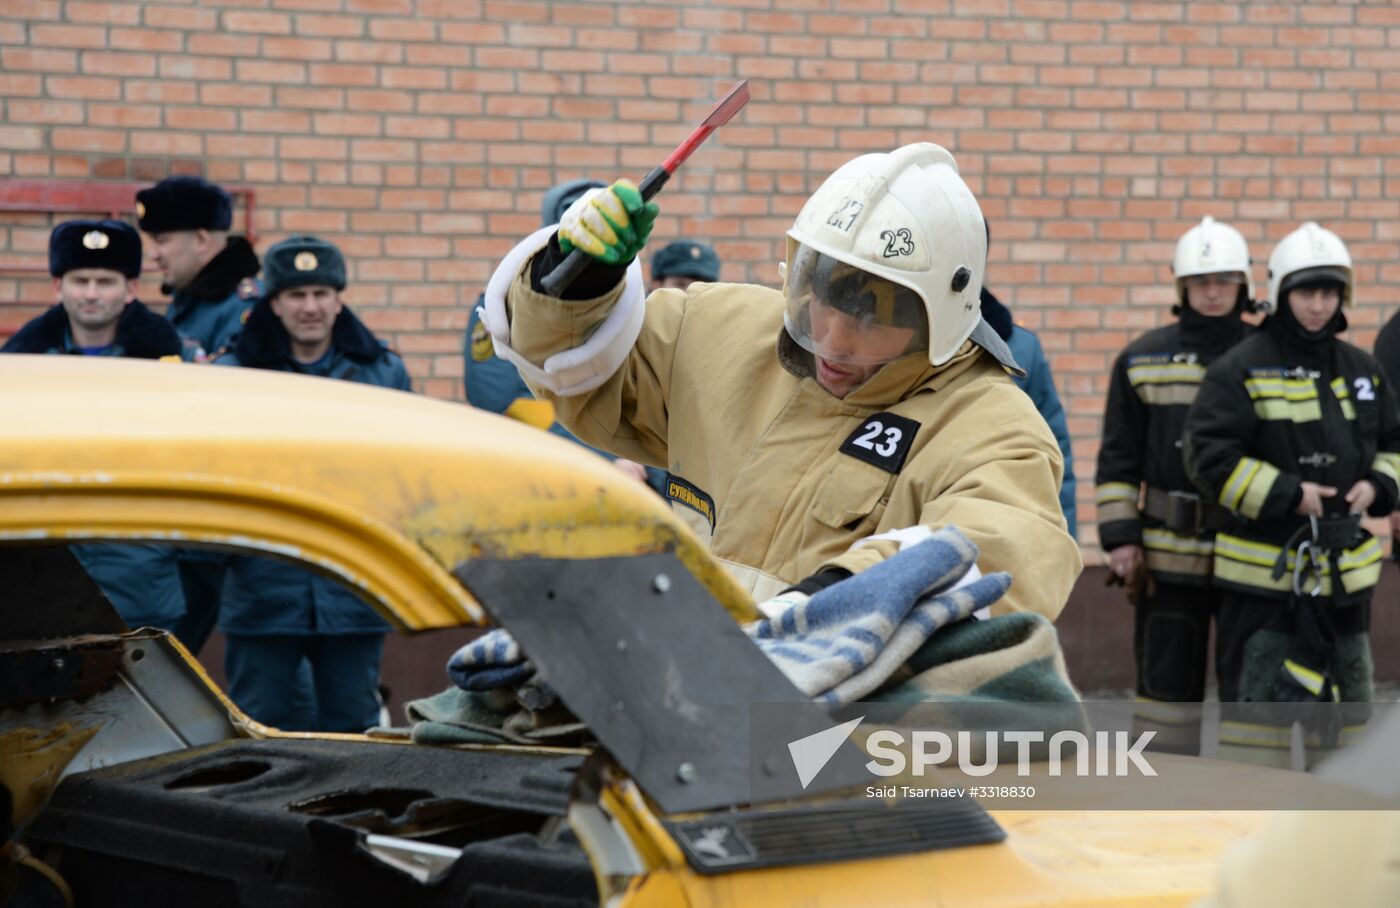 Competition in car accident relief in Grozny